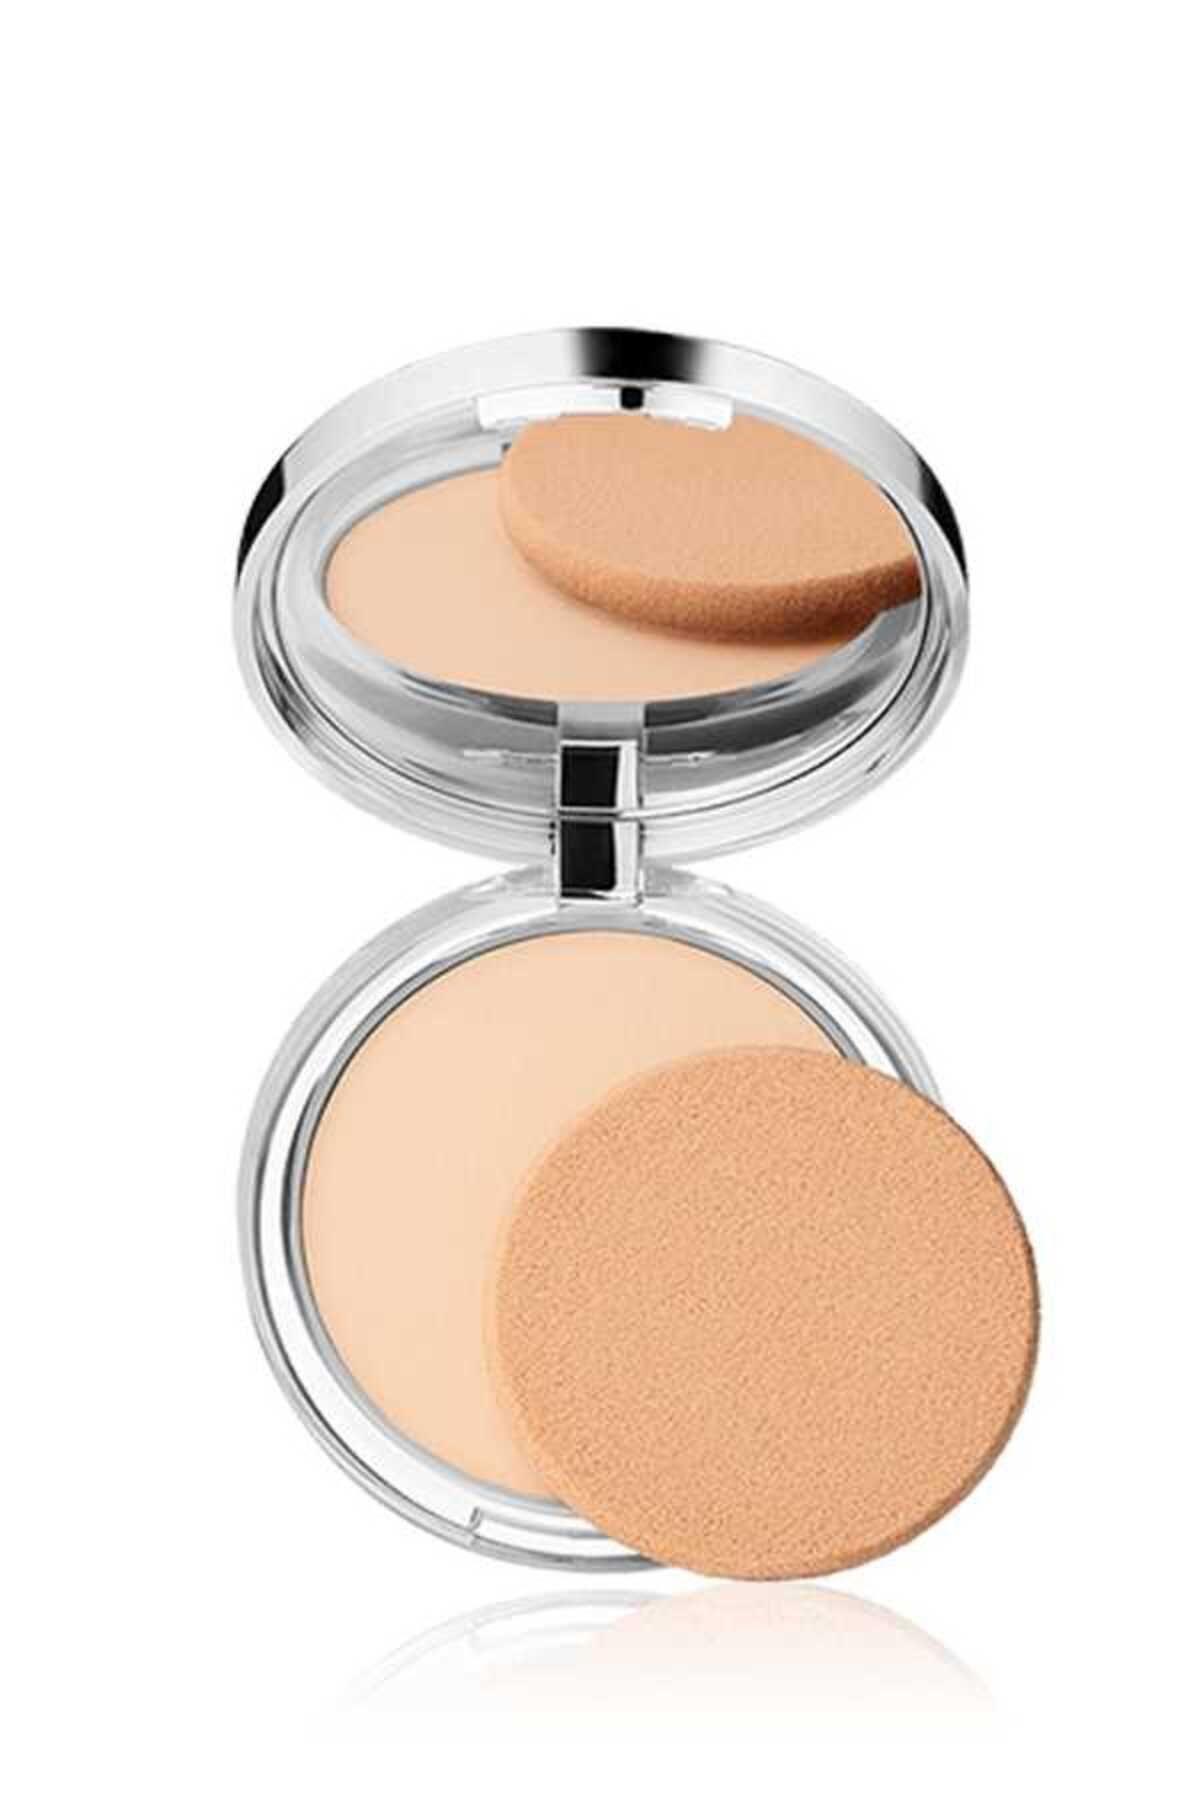 Clinique Pudra - Stay Matte Sheer Pressed Powder Stay Buff 7.6 g 020714066109